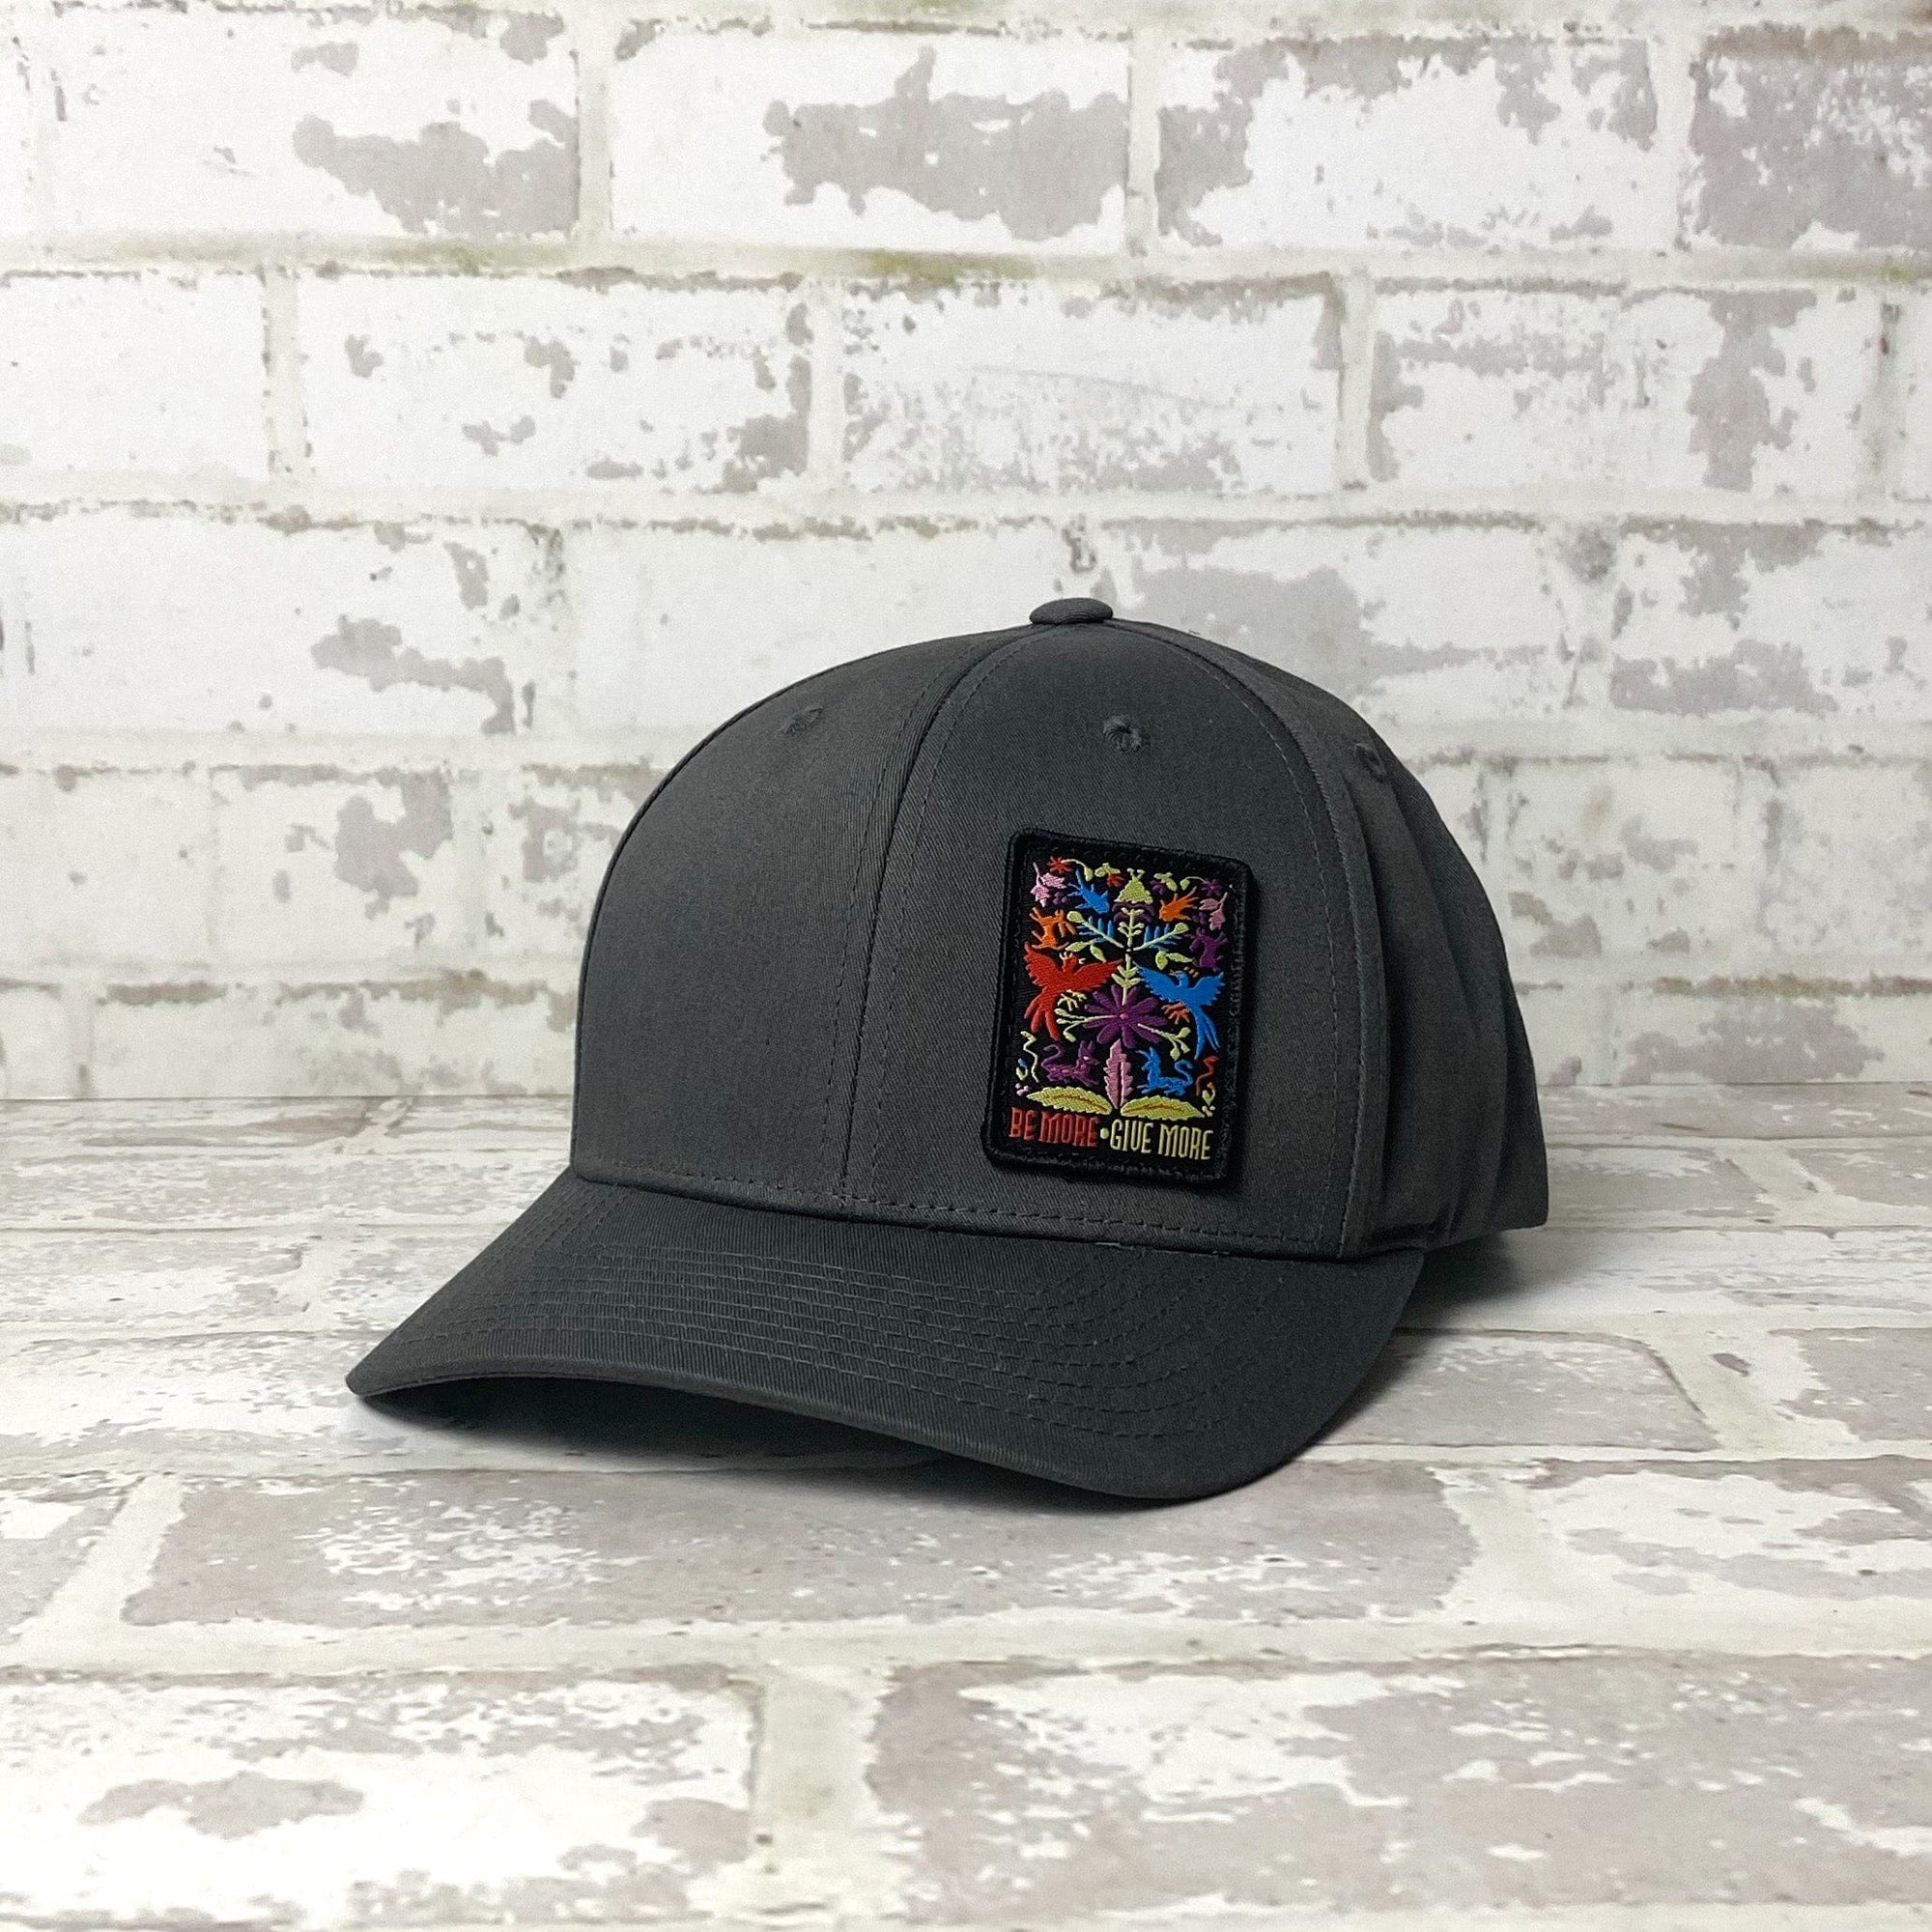 Lucky Chuck™ Hats Be More • Give More Patch Hat - Snapback